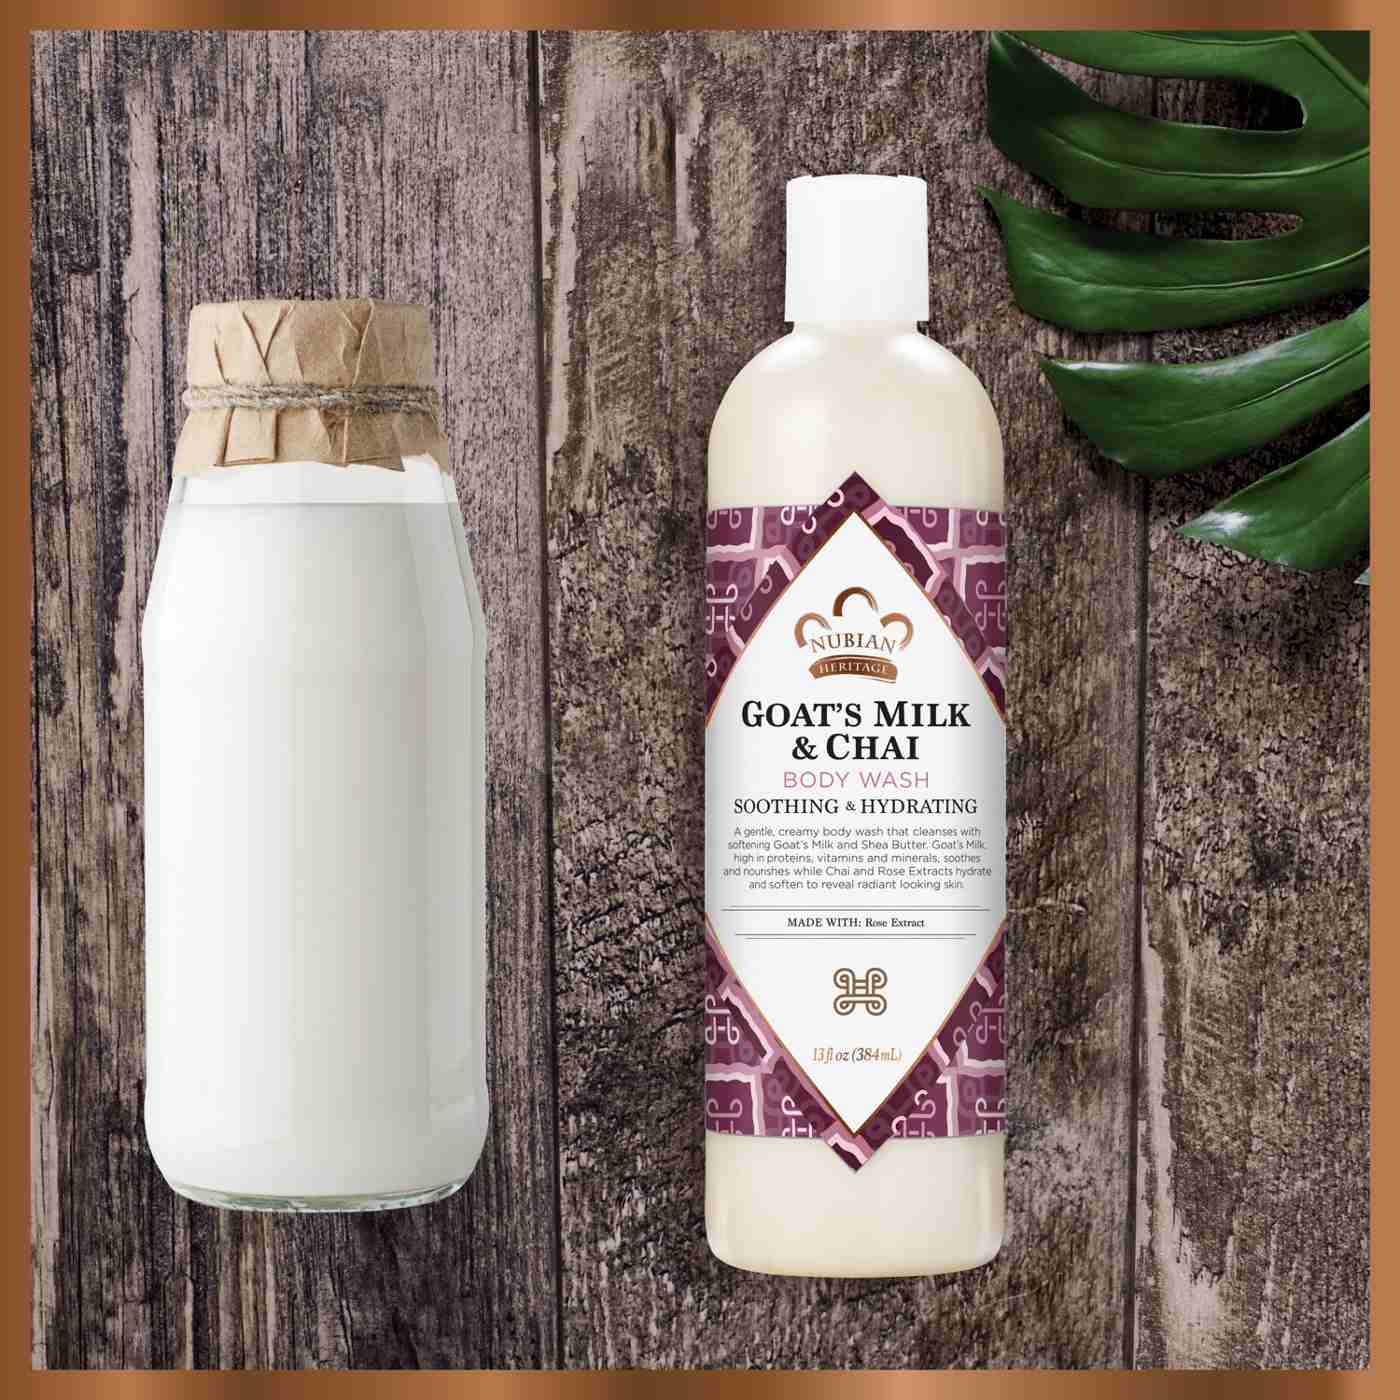 Caprina Fresh Goat's Milk Body Wash with Orchid Oil - Shop Body Wash at  H-E-B